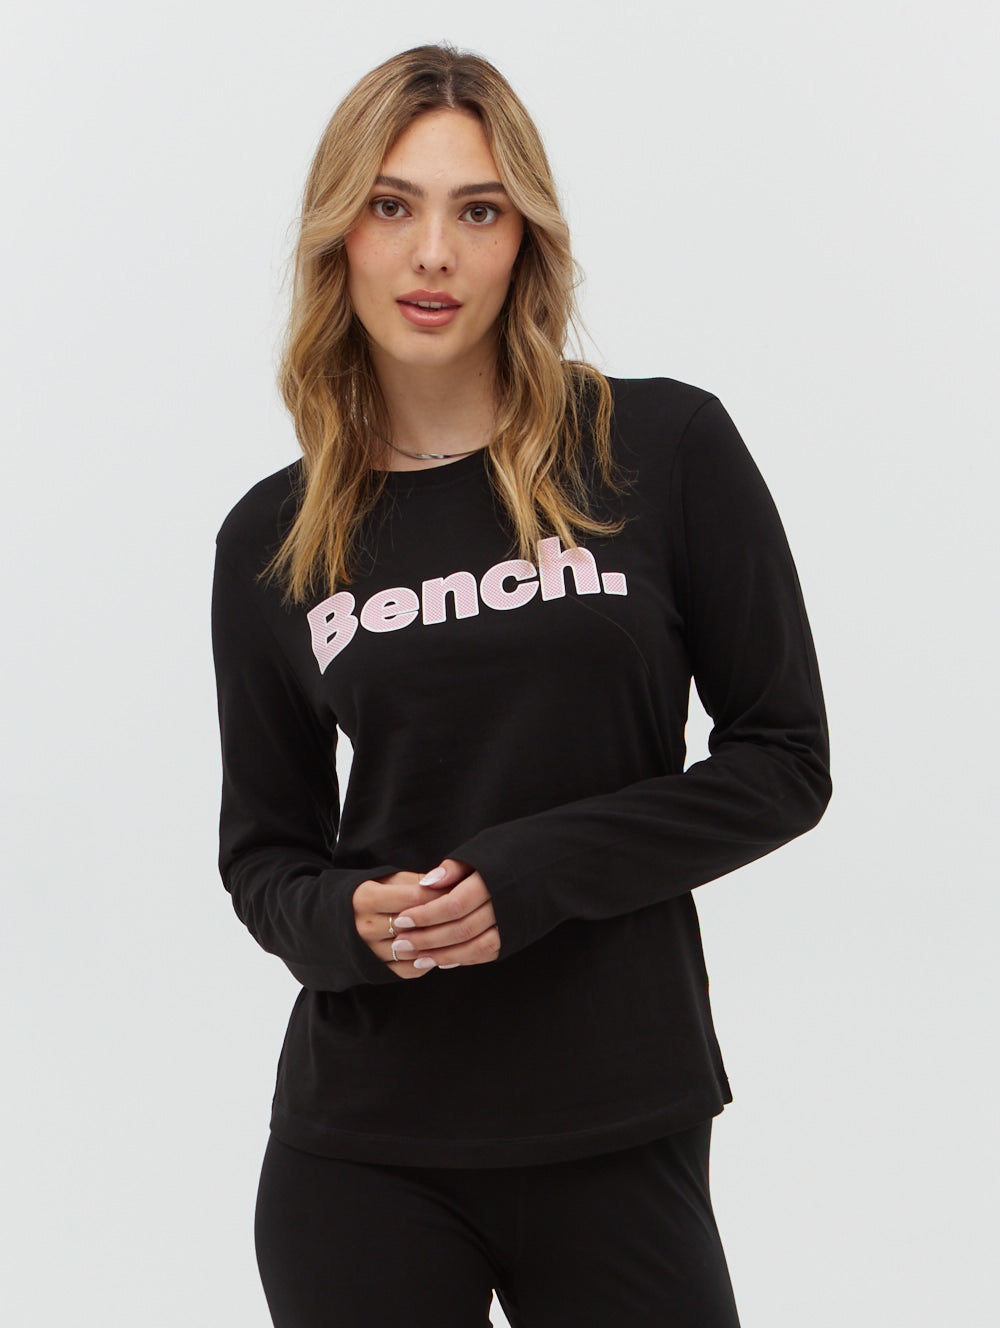 Bench/ lifestyle + clothing - New introductions for BENCH/ BODY ladies just  got in at the online store!